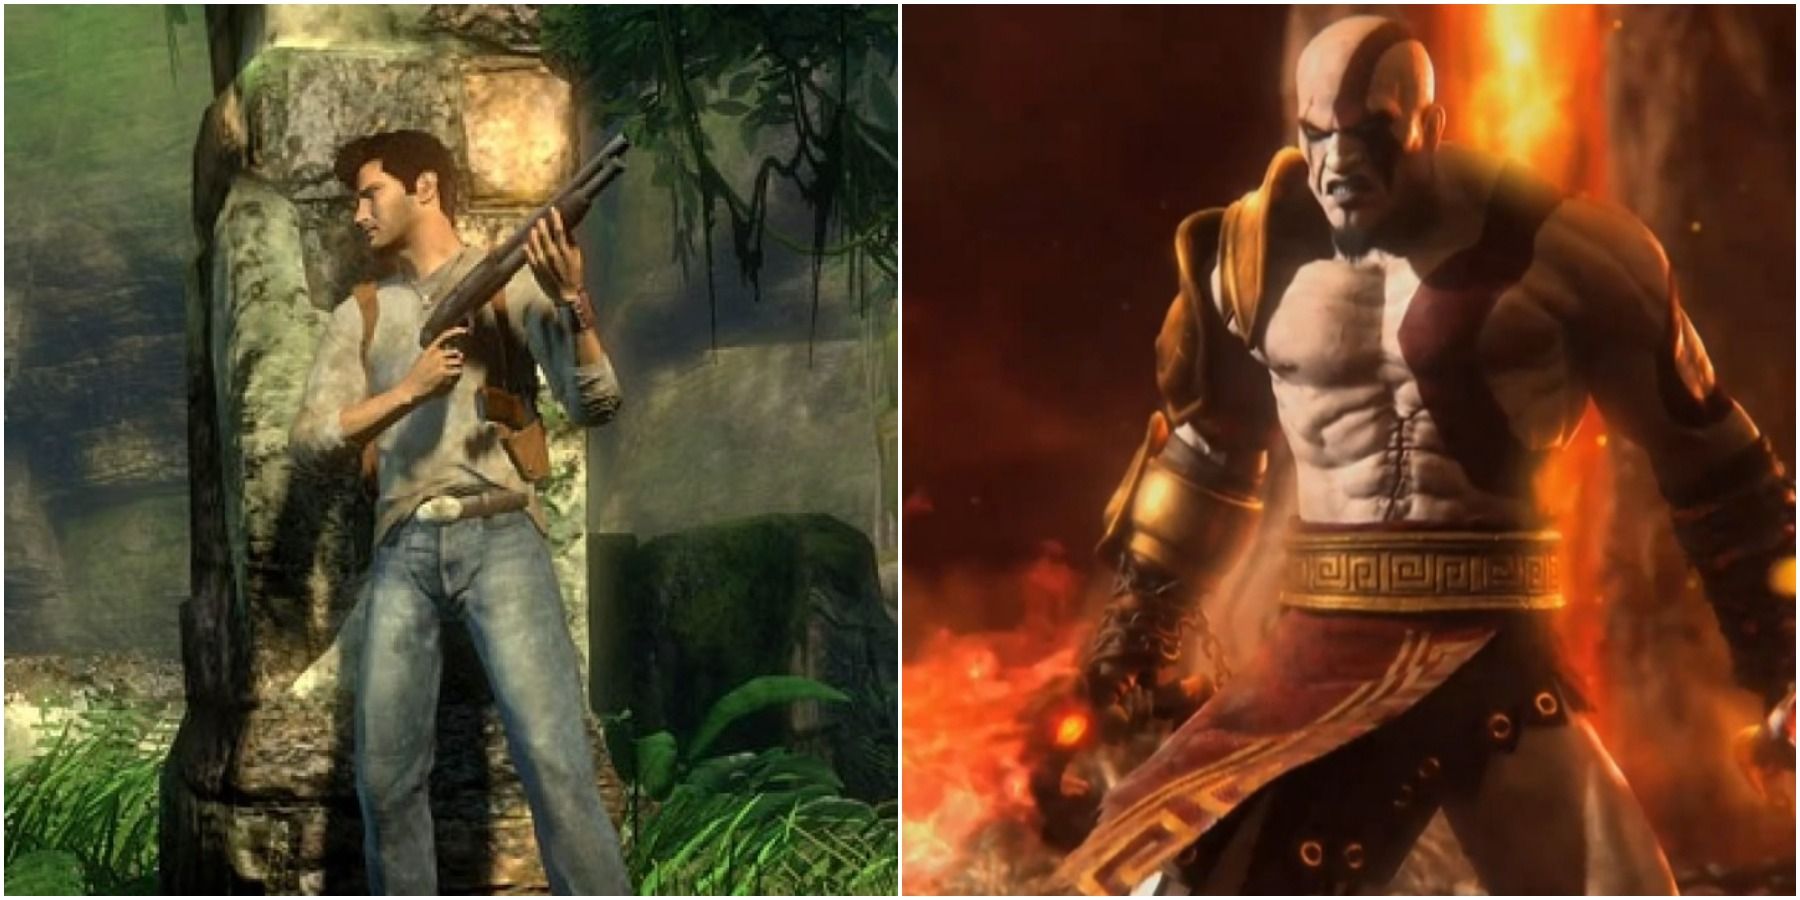 (Left) Nathan Drake from Uncharted (Right) Kratos from God of War